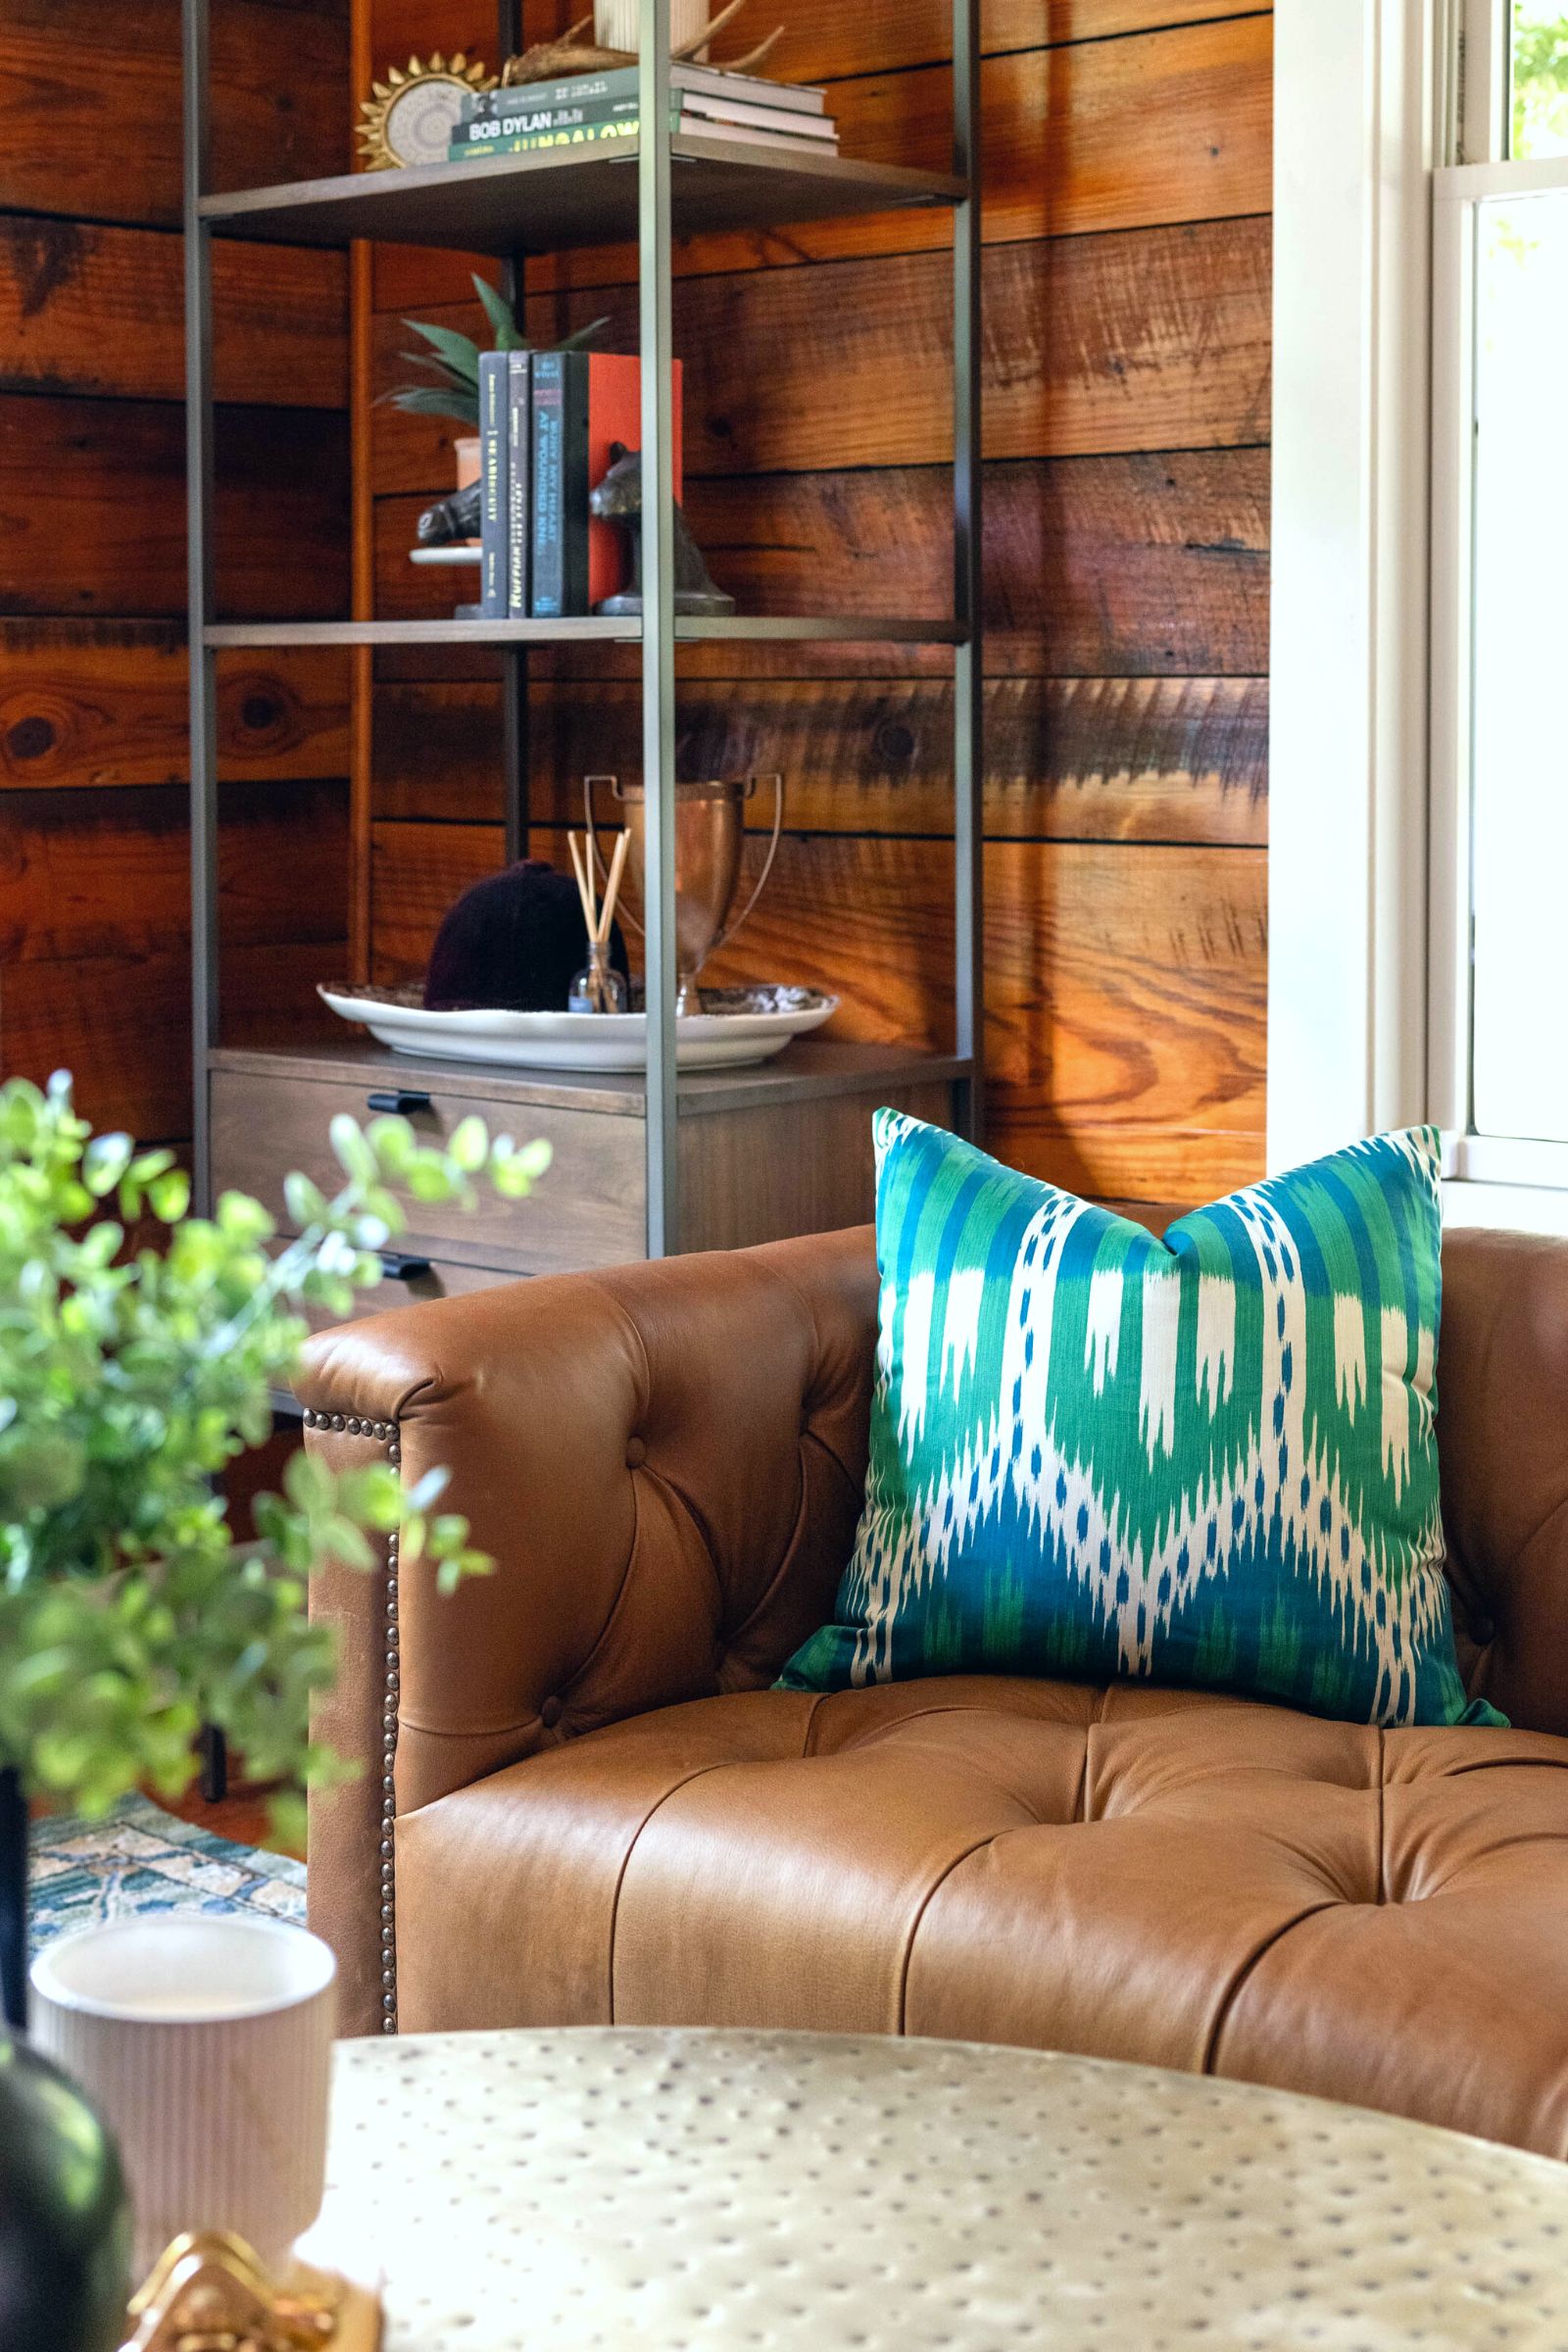 Brown leather tufted sofa with green Ikat accent pillow by Lesley Myrick Interior Design